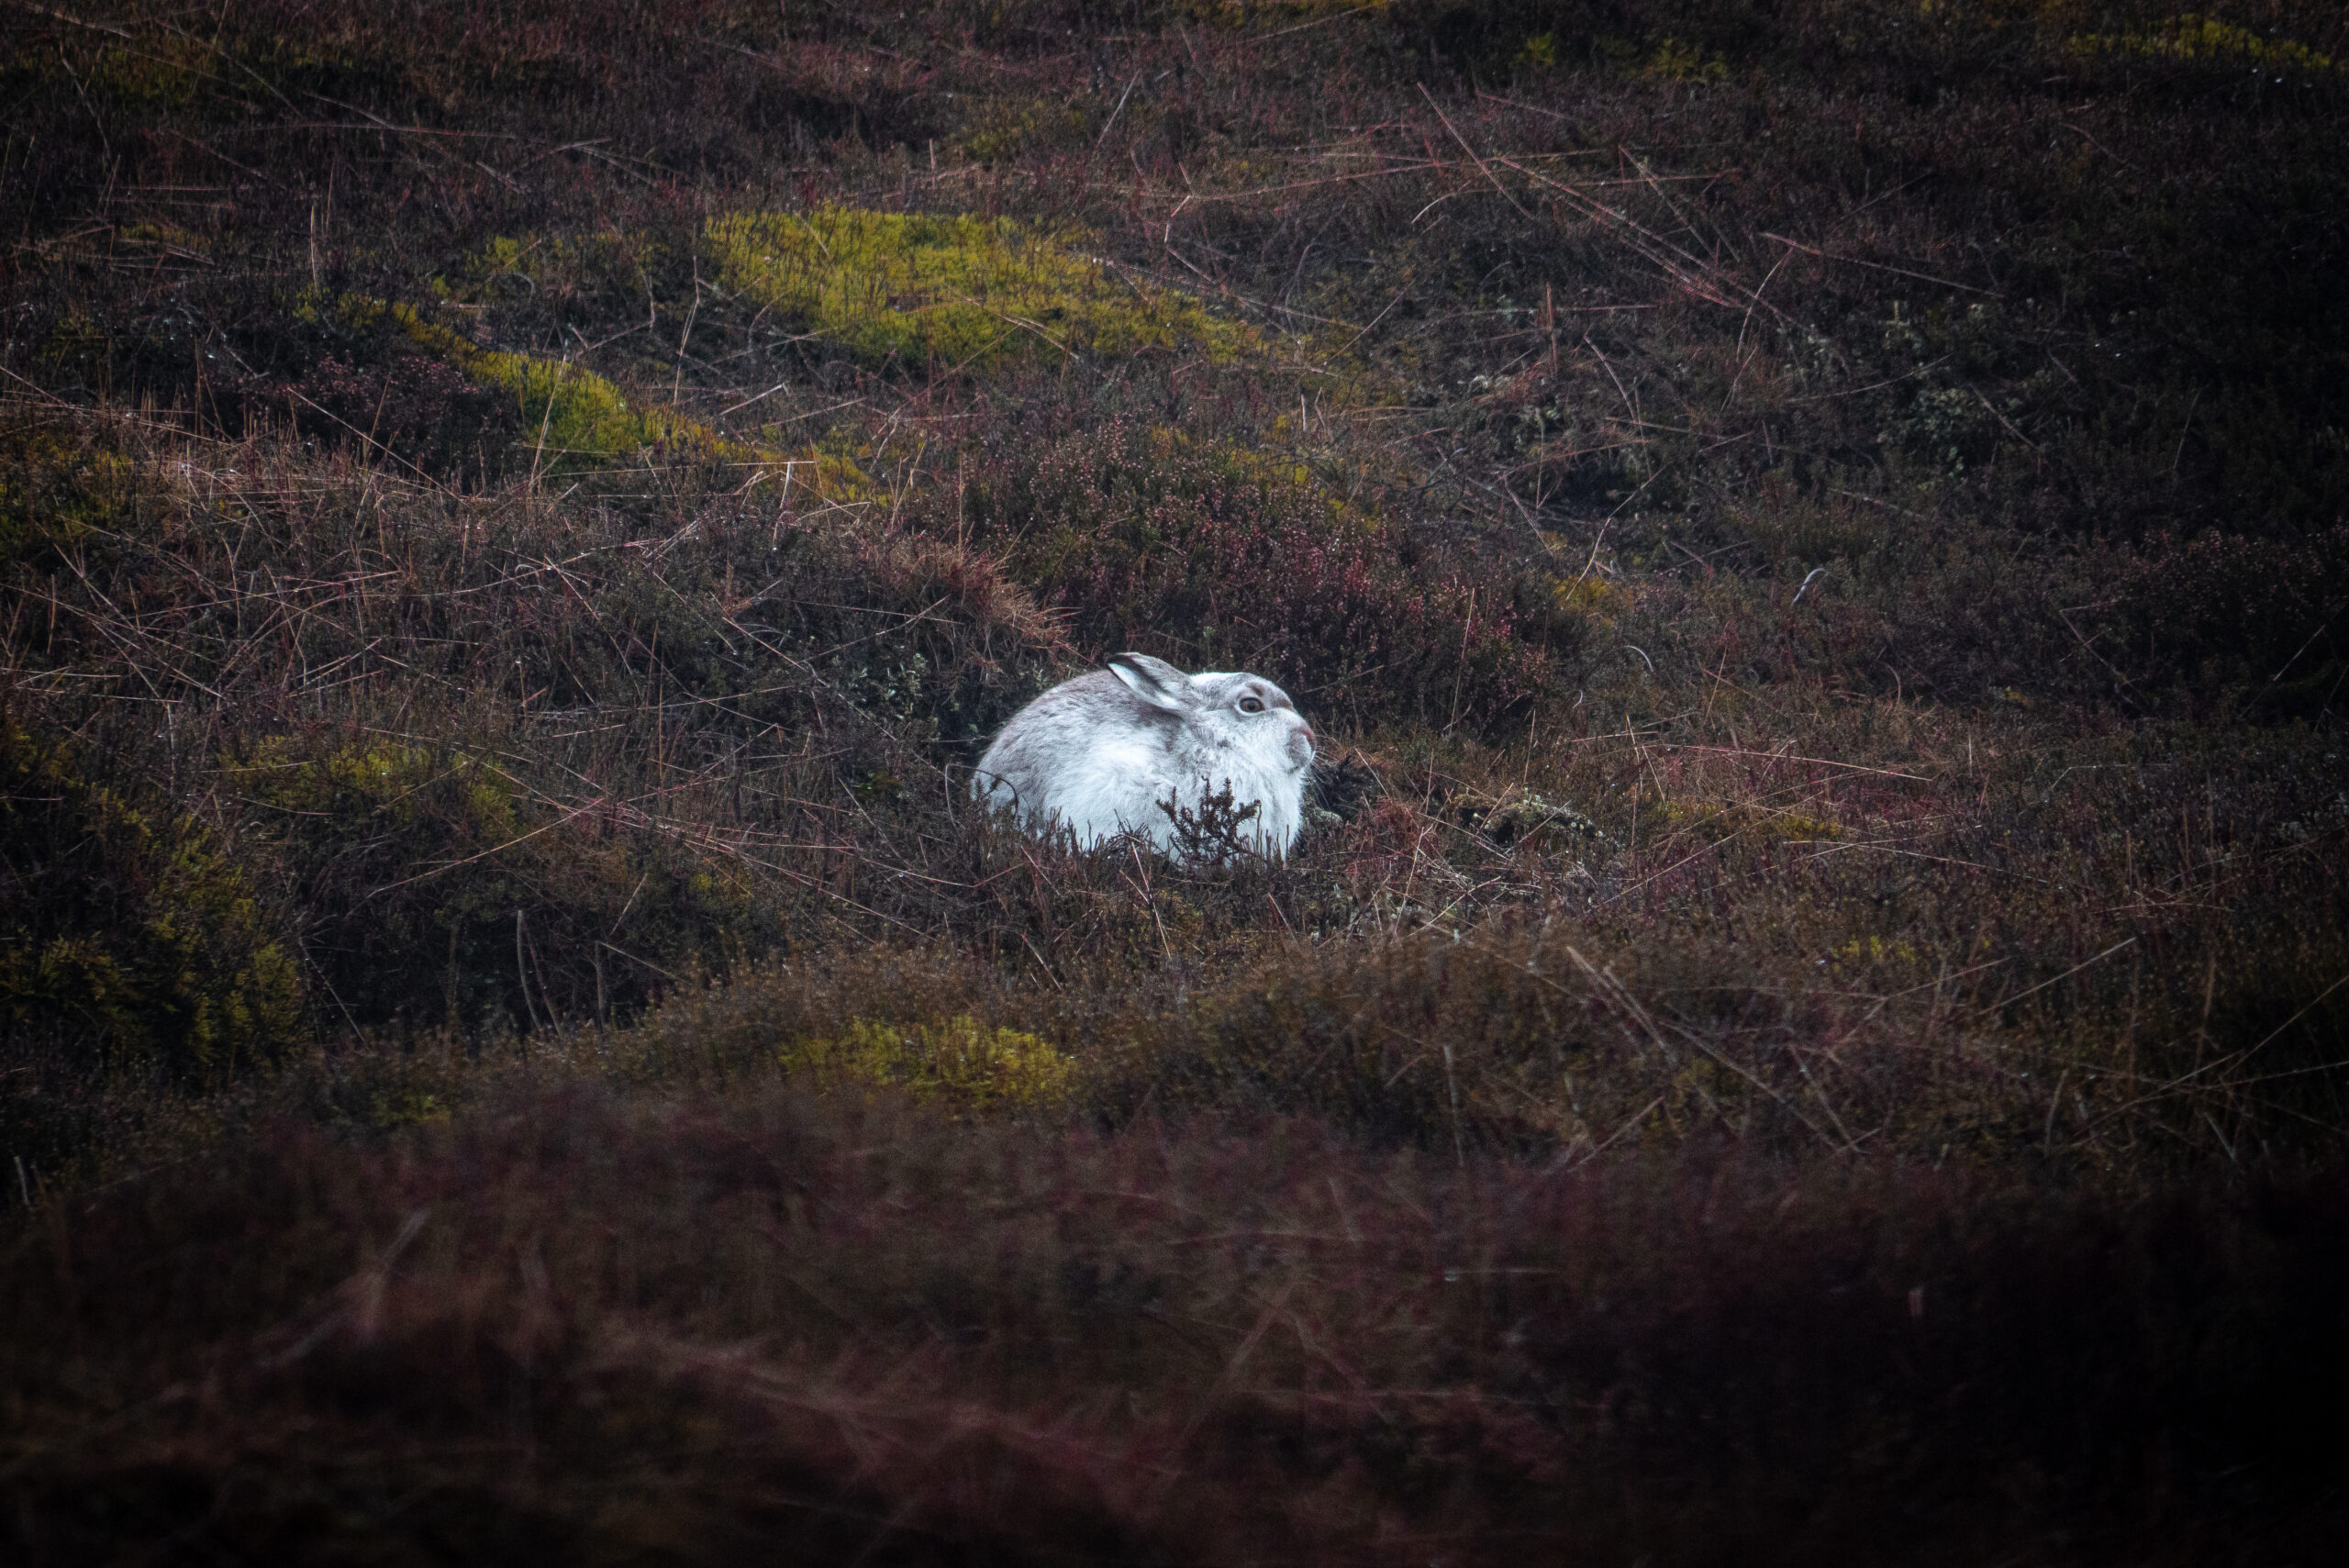 Peak District a stronghold for mountain hares